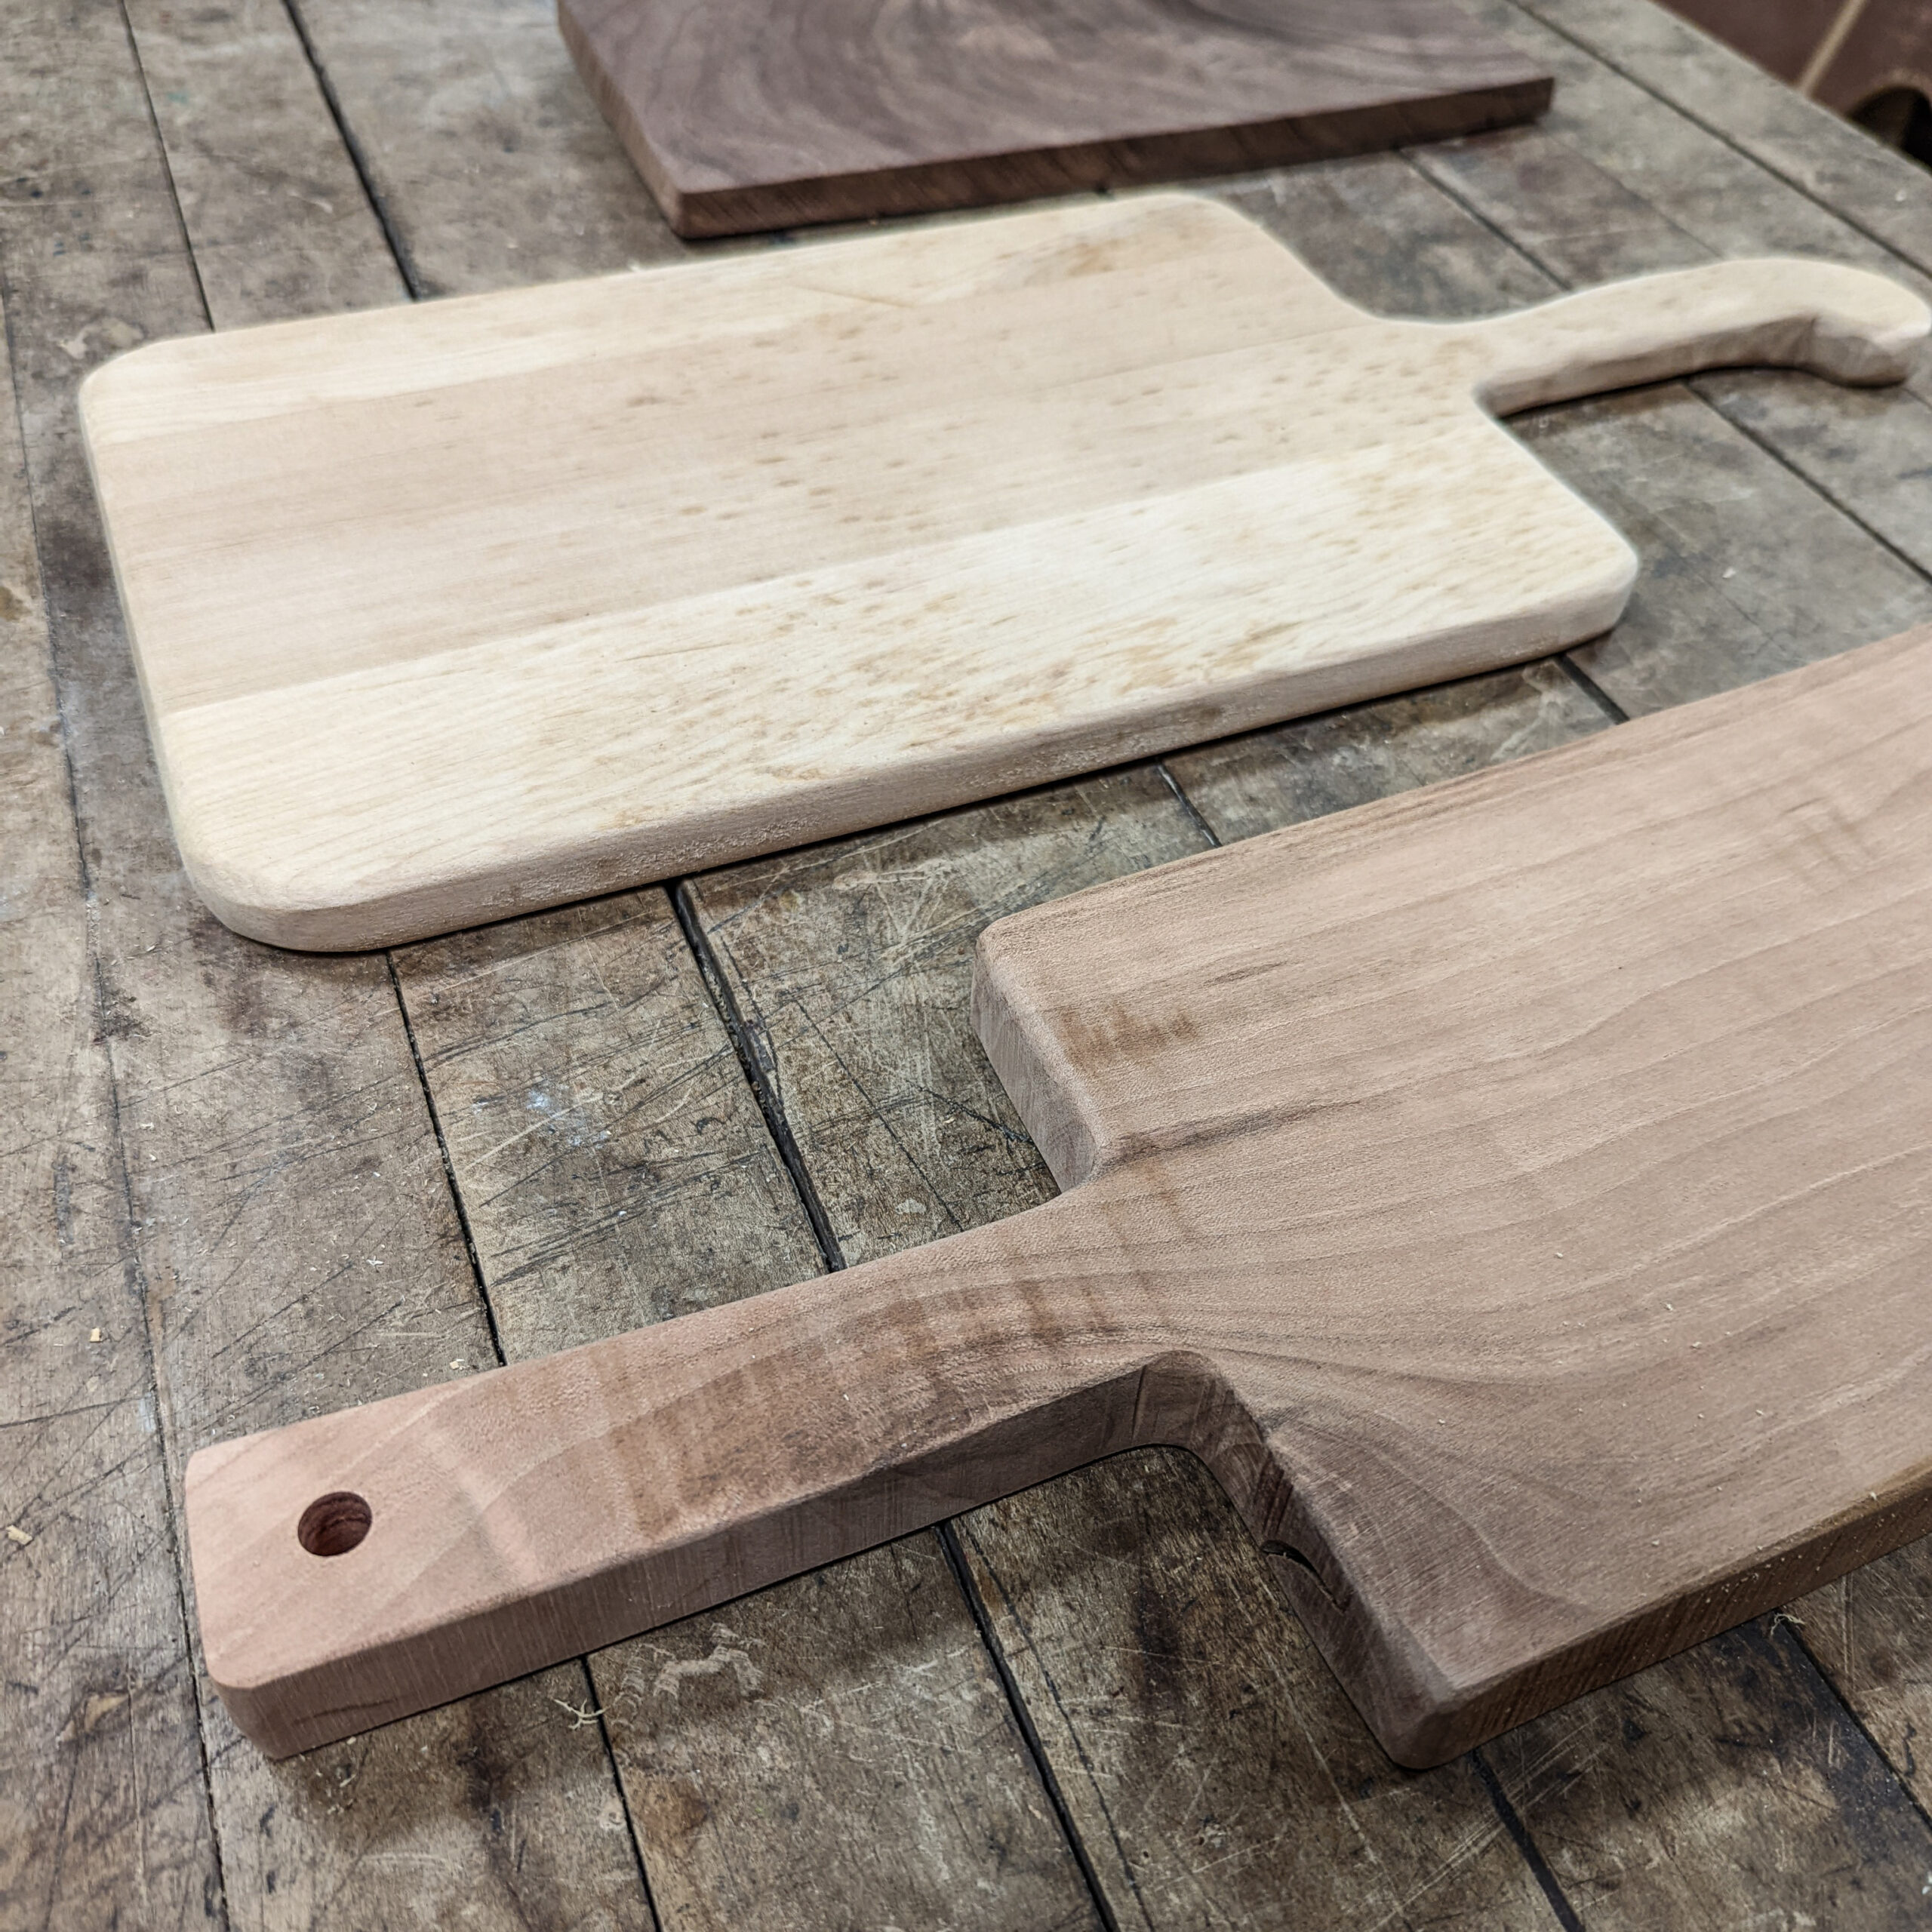 Homemade rustic cutting boards and cheese board made using basic tools in a shared community woodshop.